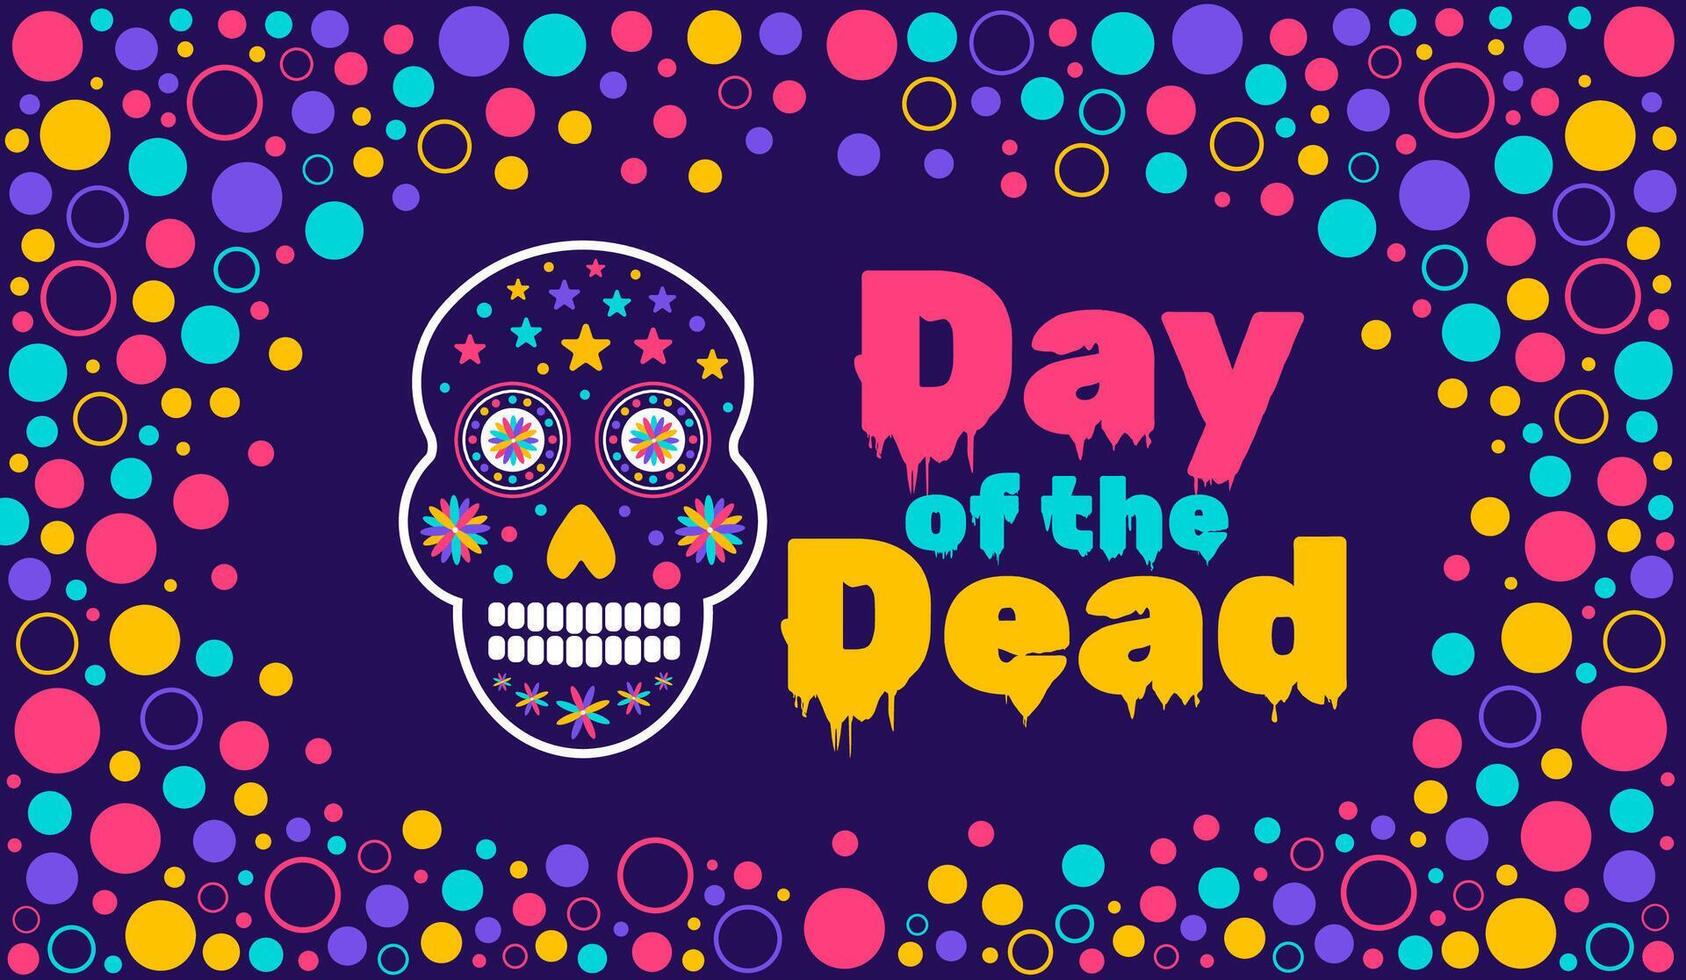 Day of the dead, Dia de los muertos, Dia de Muertos colorful Mexican skull pattern background design template. traditional Mexican holiday poster, party flyer, greeting card, banner and background. vector